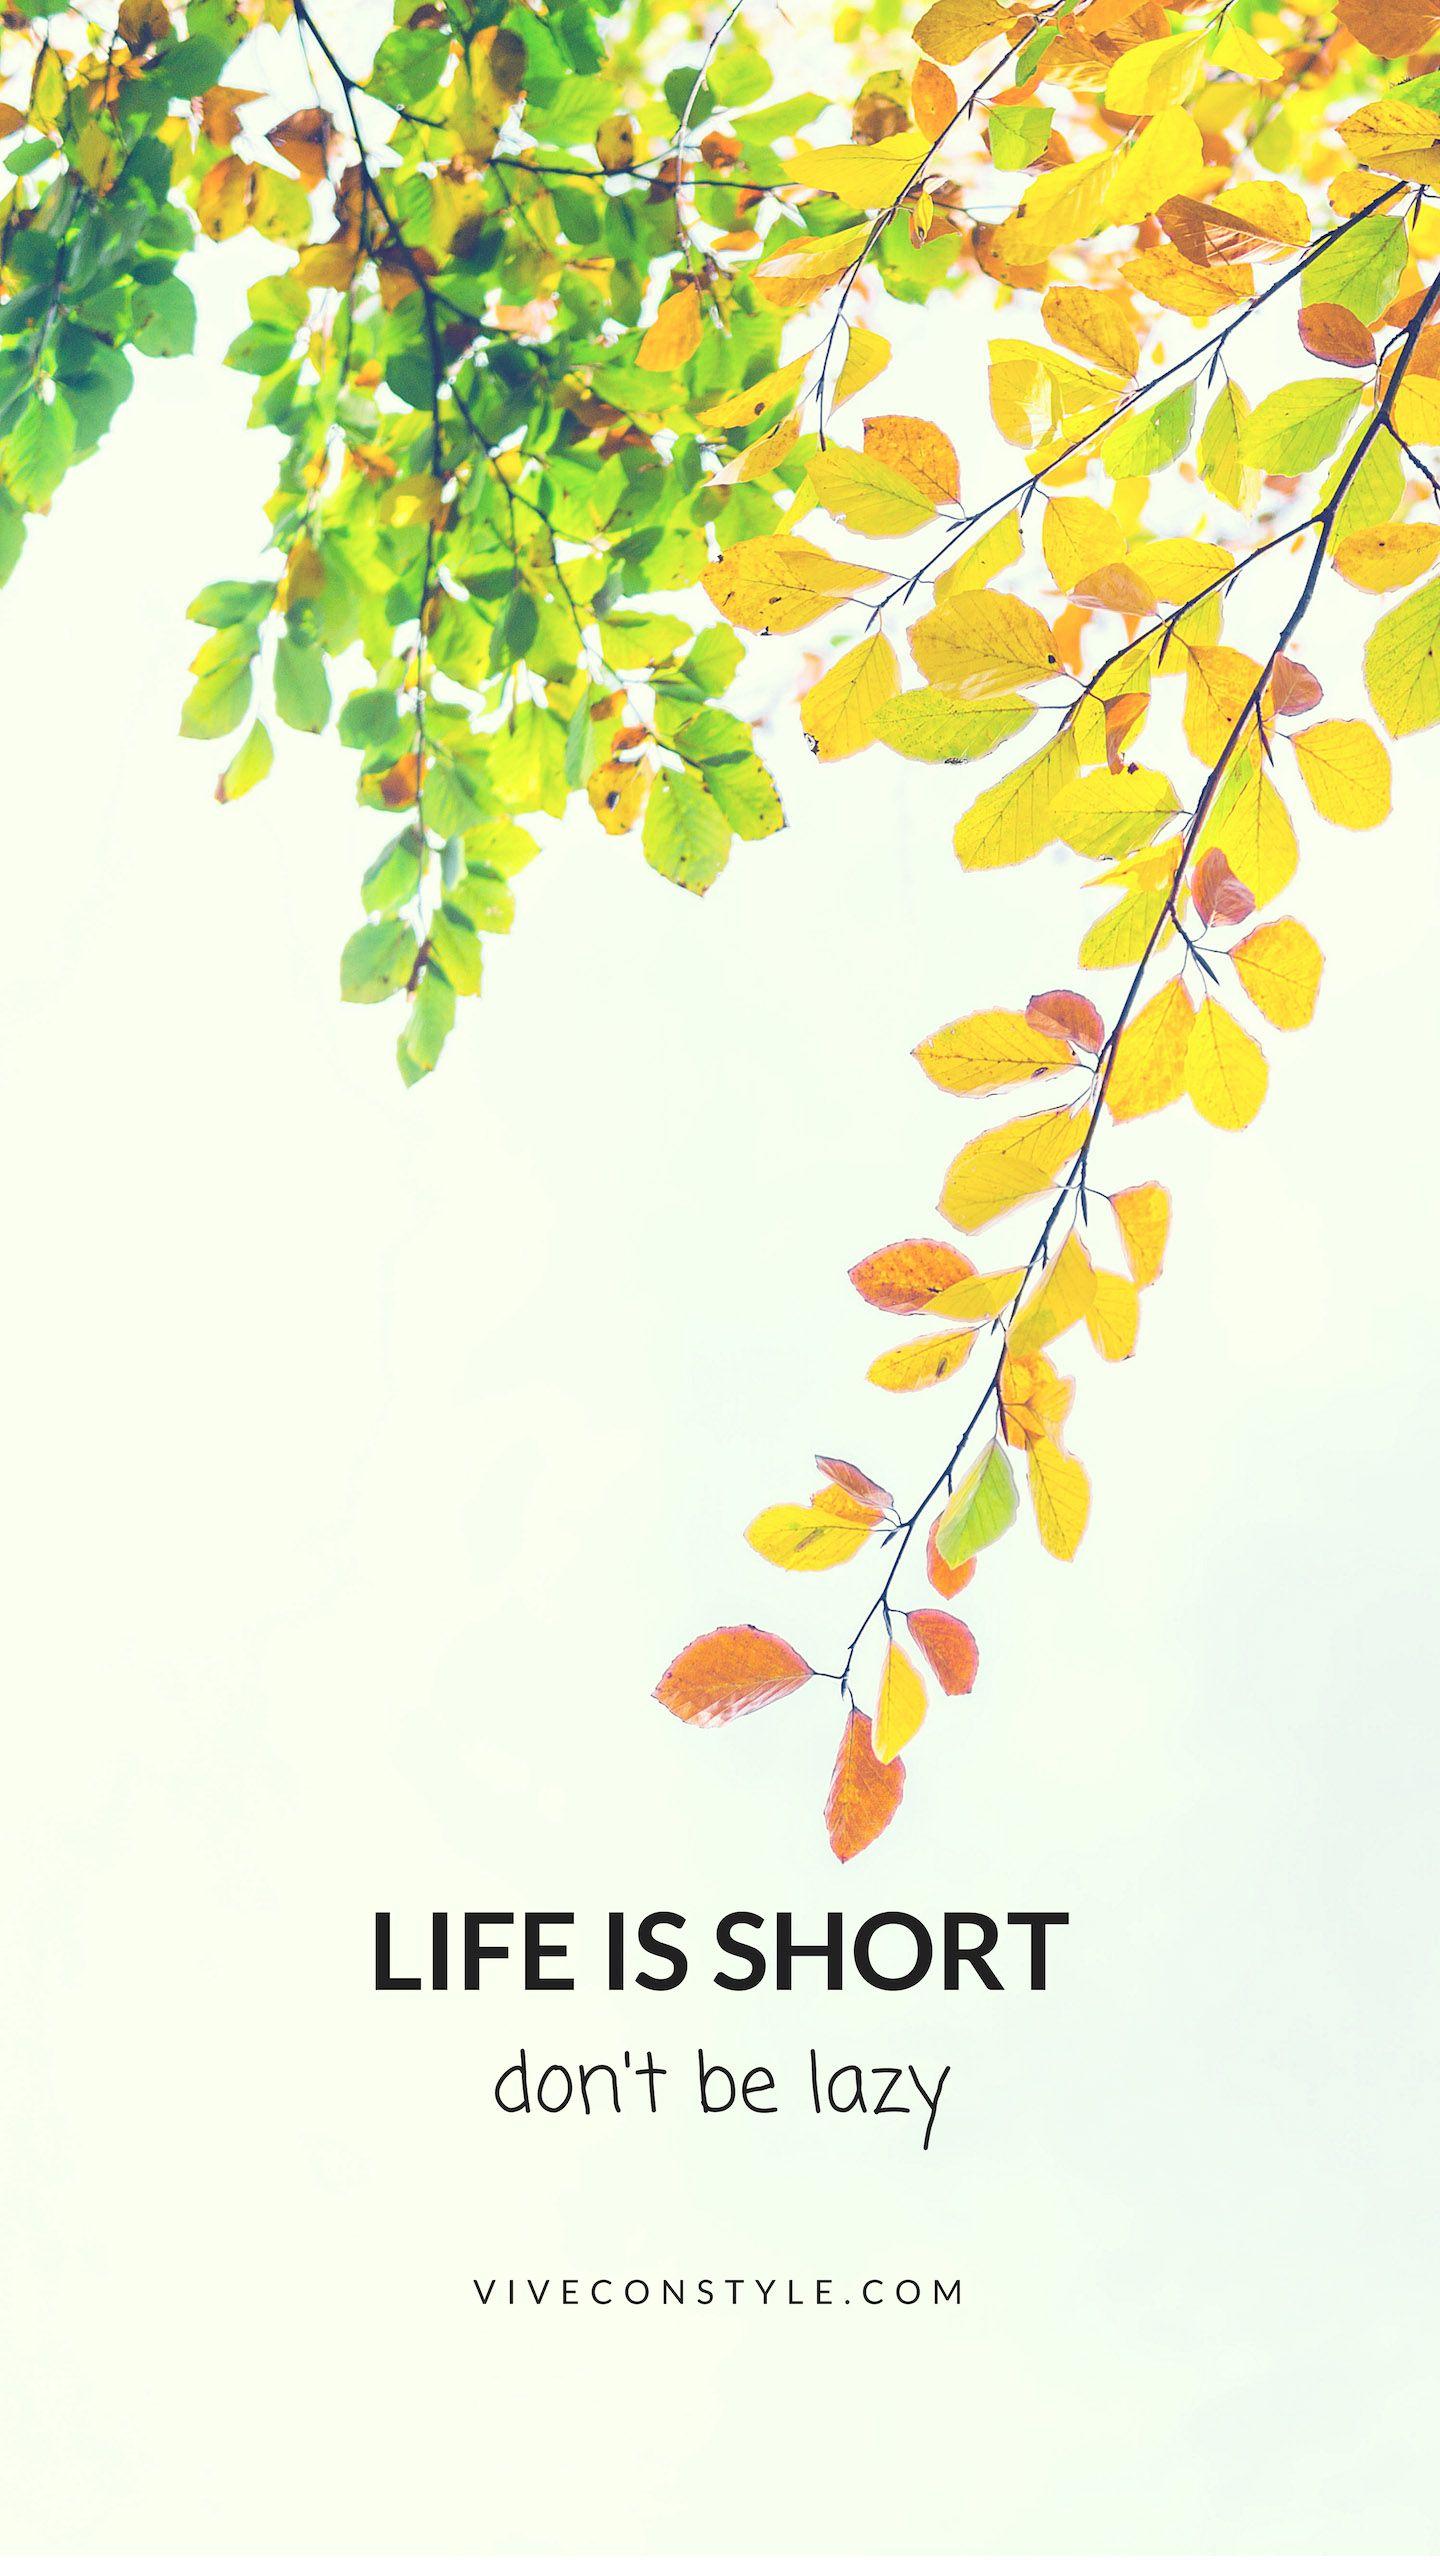 Life is short Don't be lazy. Inspirational wallpaper, Wallpaper image hd, Cute mobile wallpaper